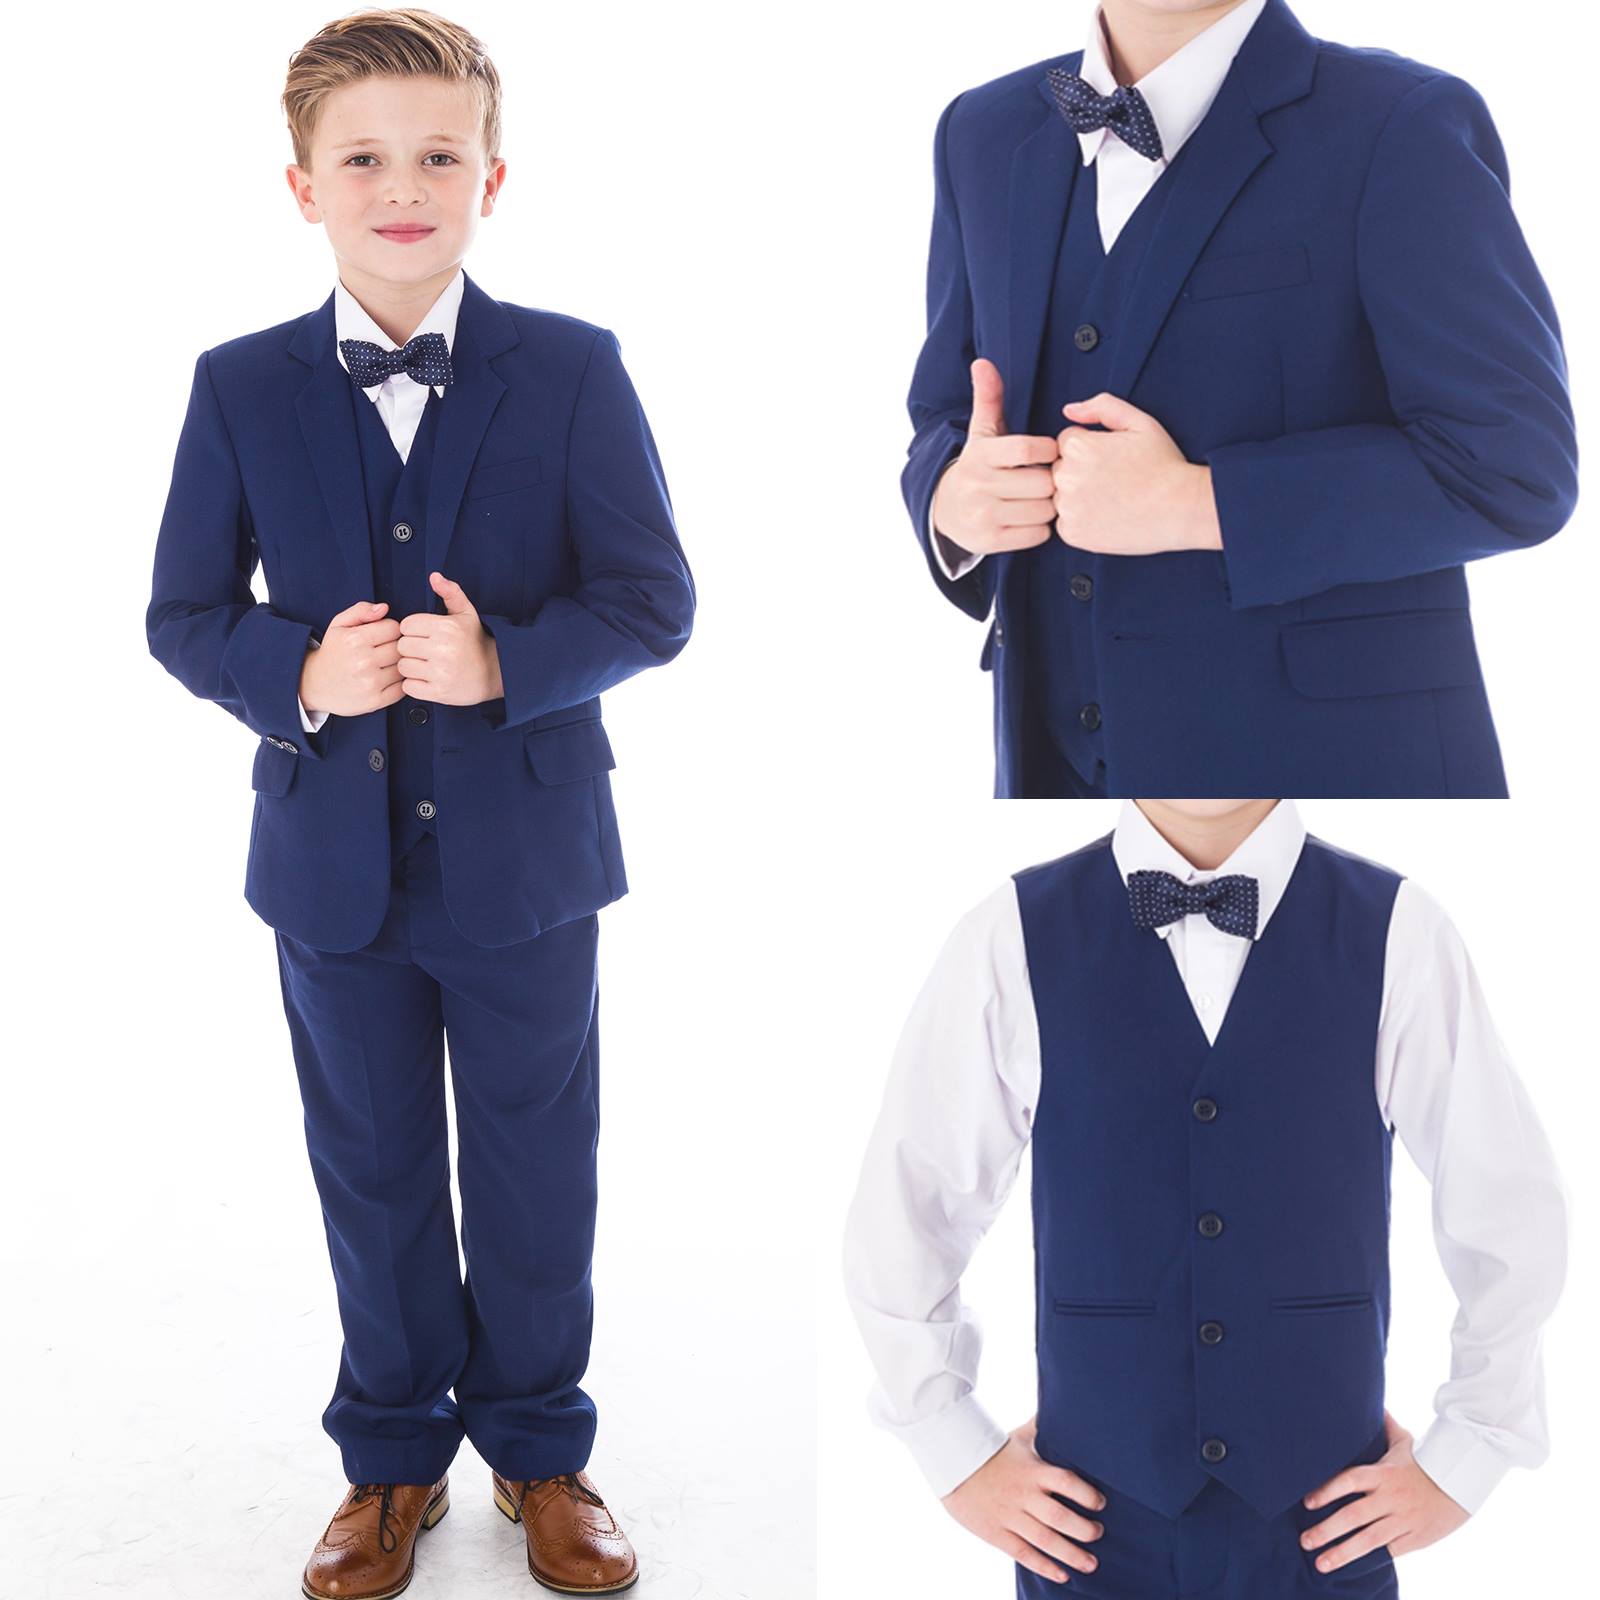 Boys Tuxedo 5 Peice Suit Wedding Formal Smart Suit With Bow Tie 3M up to 5 Years 